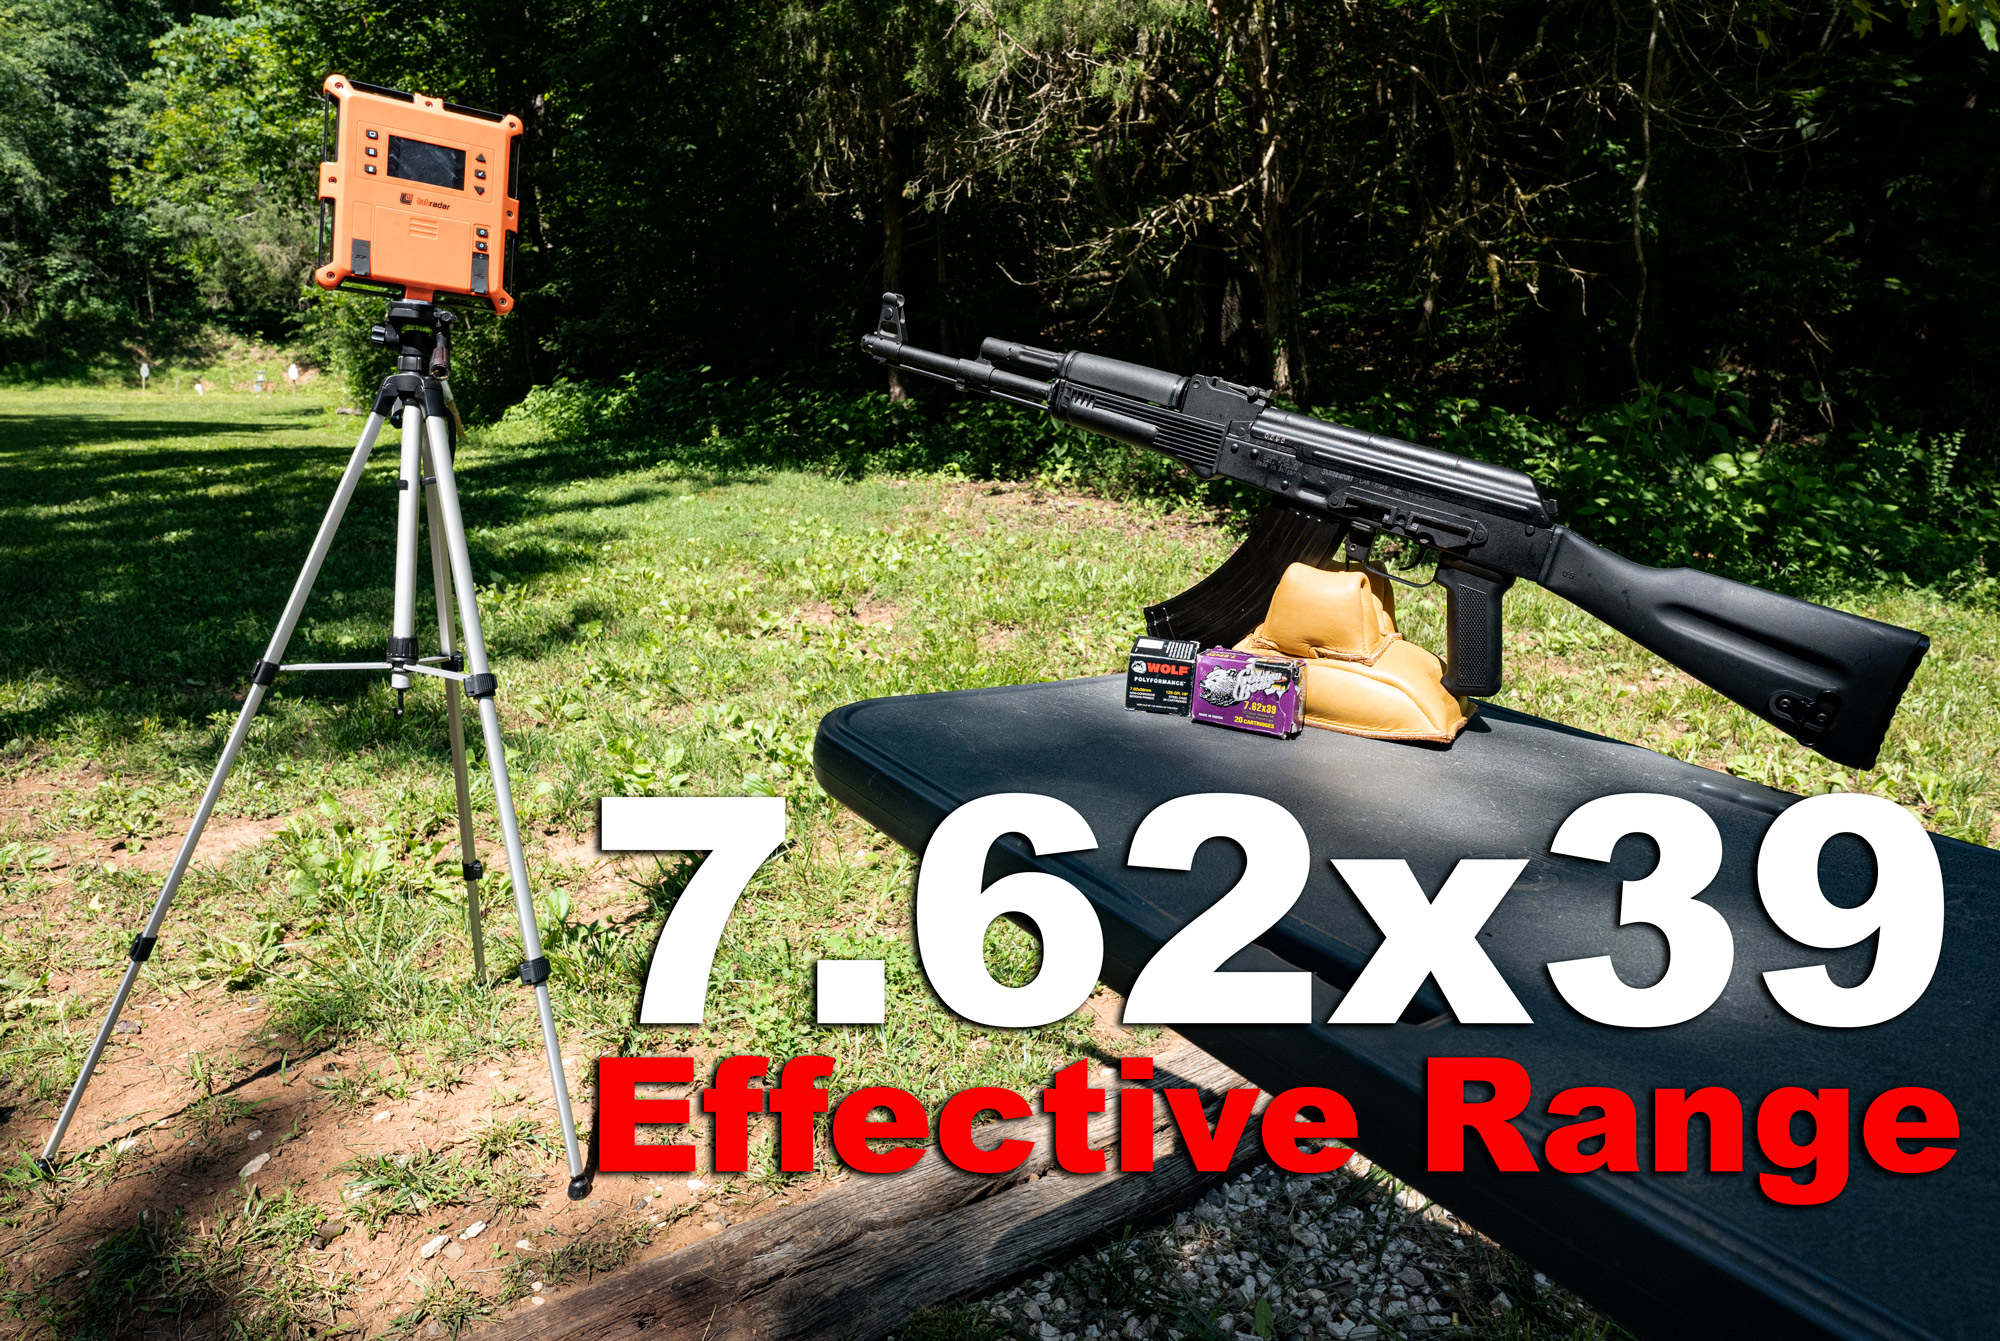 https://www.ammoforsale.com/ammo-club/media/Effective-Range-of-7.62x39-with-rifle-and-chronograph-at-a-shooting-range.jpg